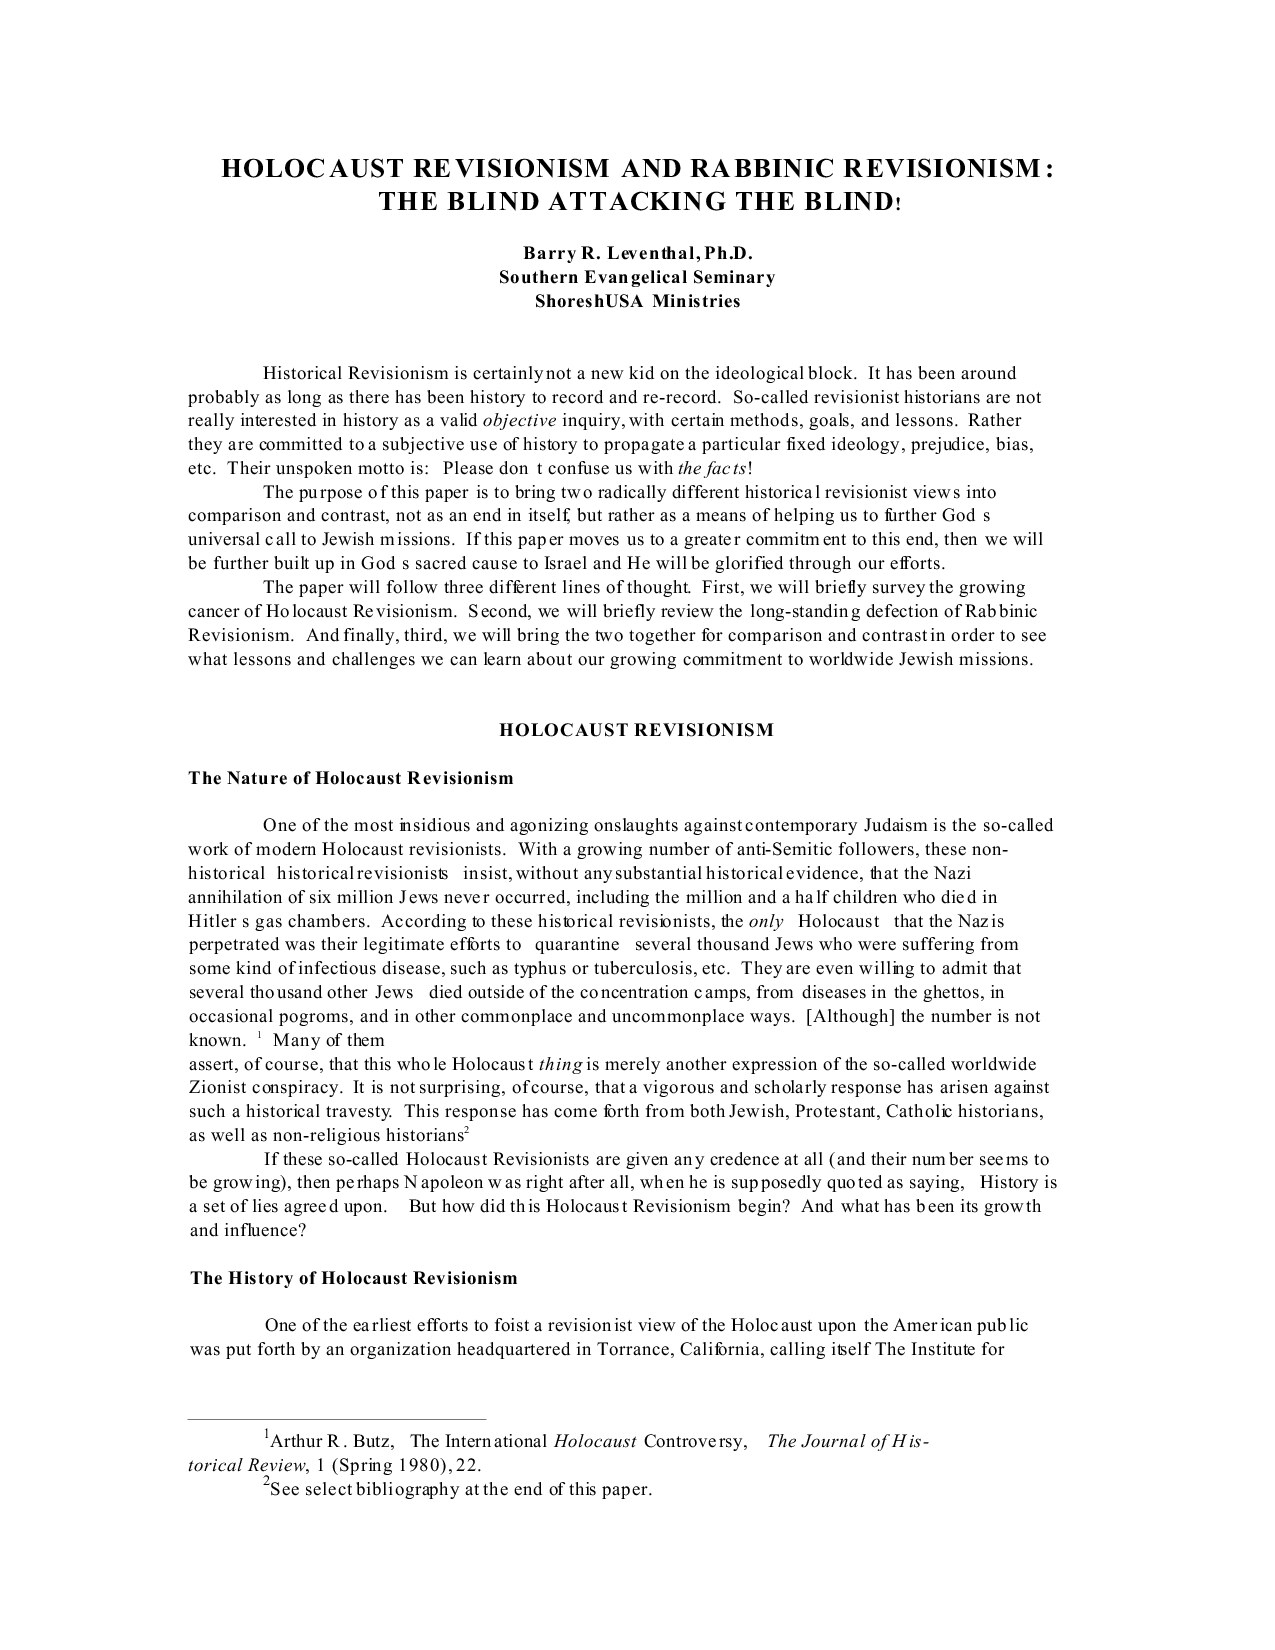 Leventhal, Barry R.; Holocaust Revisionism And Rabbinic Revisionism - The Blind Attacking The Blind